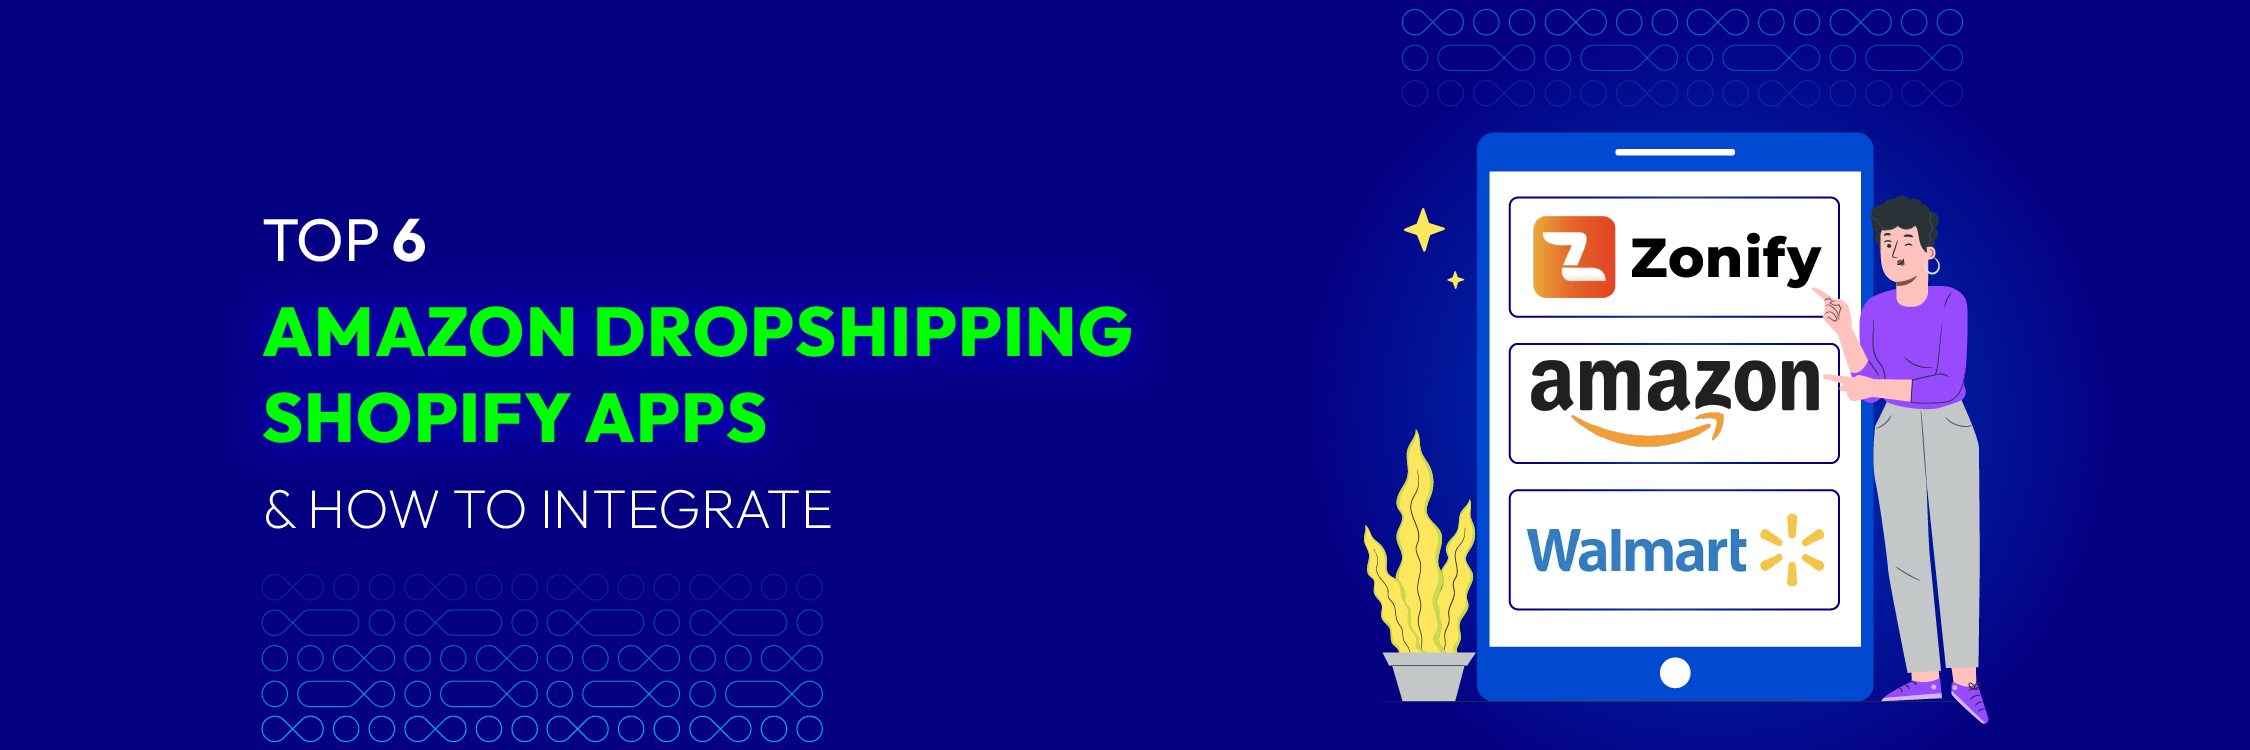 Top 6 Amazon Dropshipping Shopify Apps and How to Integrate